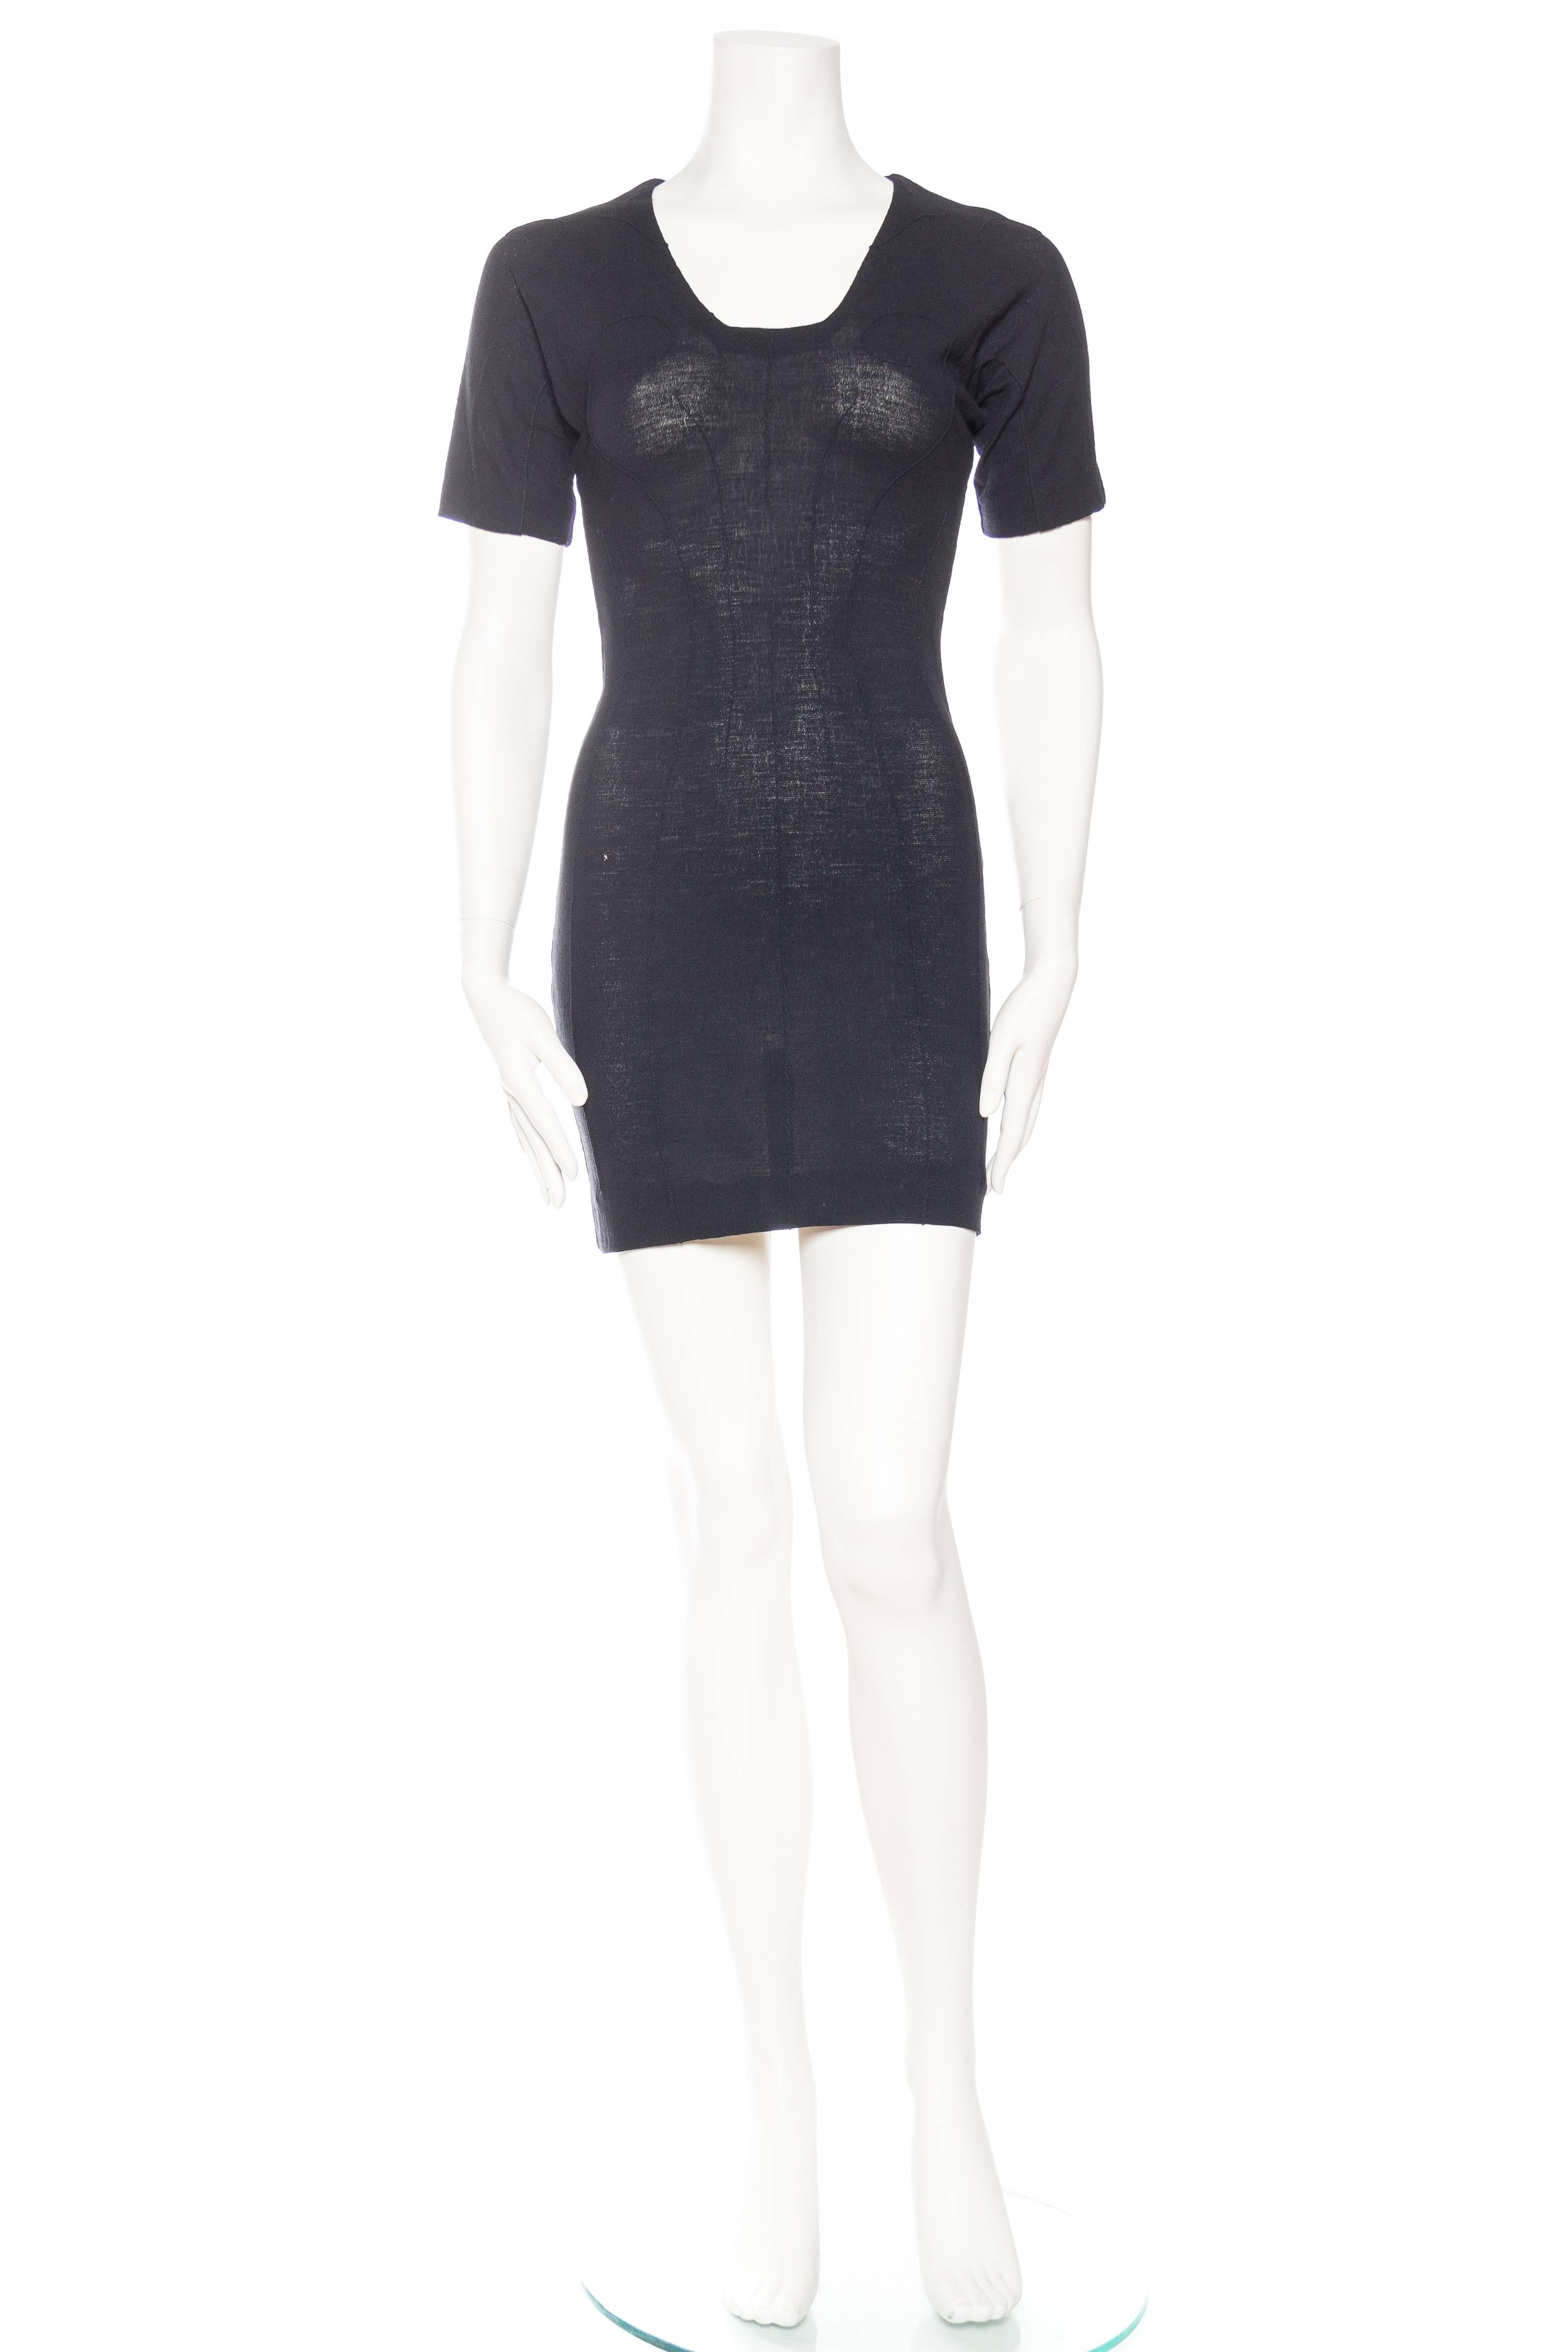 1990S SHILLA POR GIBO Black Rayon Blend Jersey Short Sleeve Body-Con Cocktail Dress With Spiral Stitching